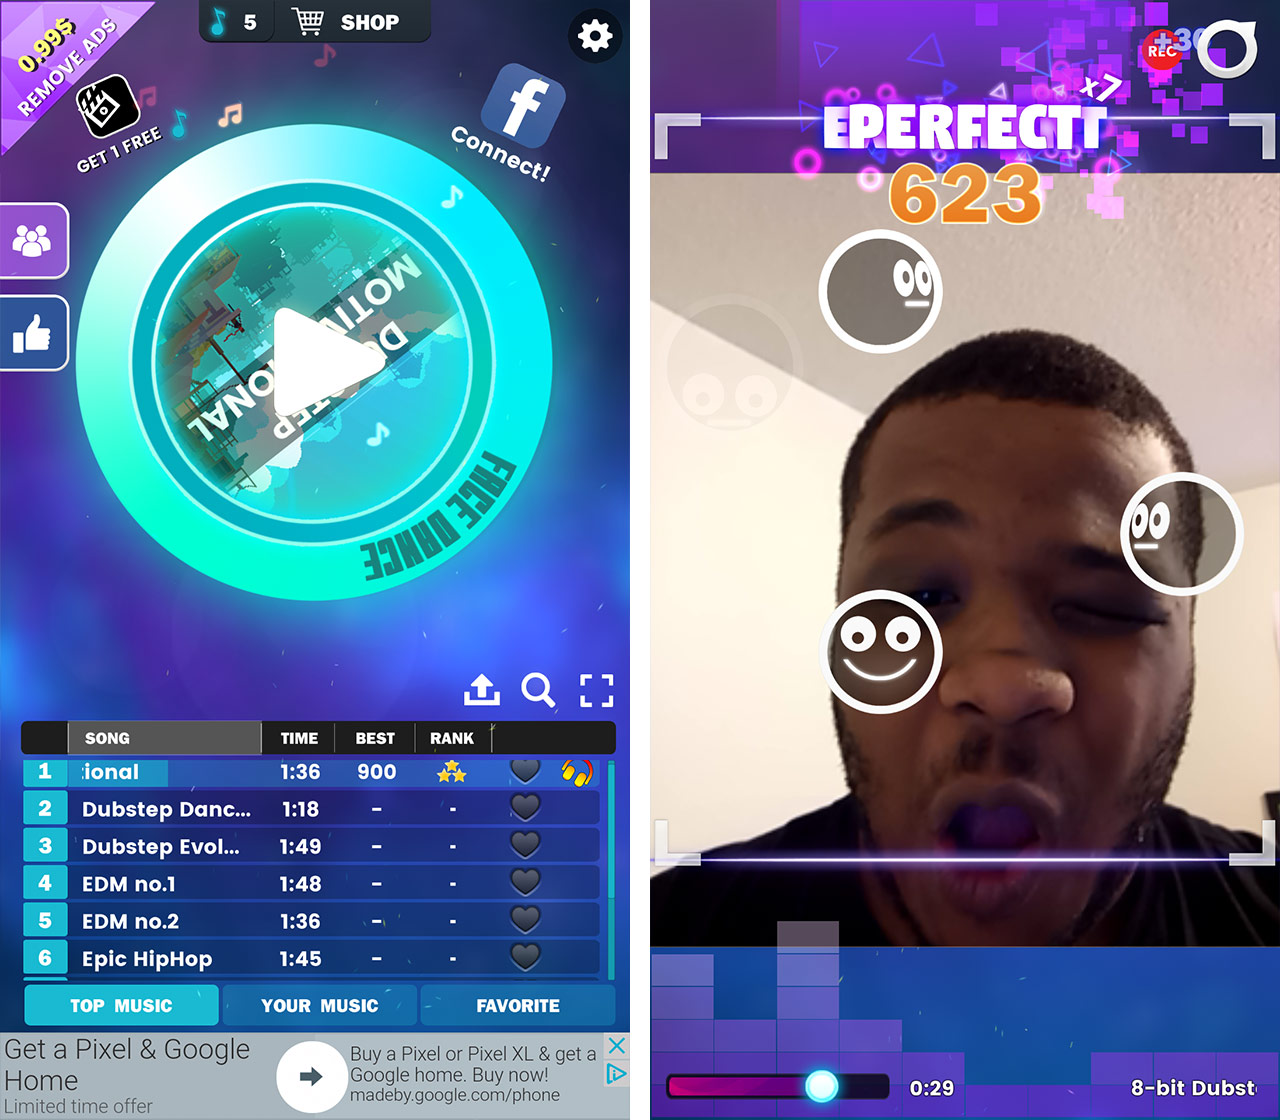 screenshots of facedance challenge! being played